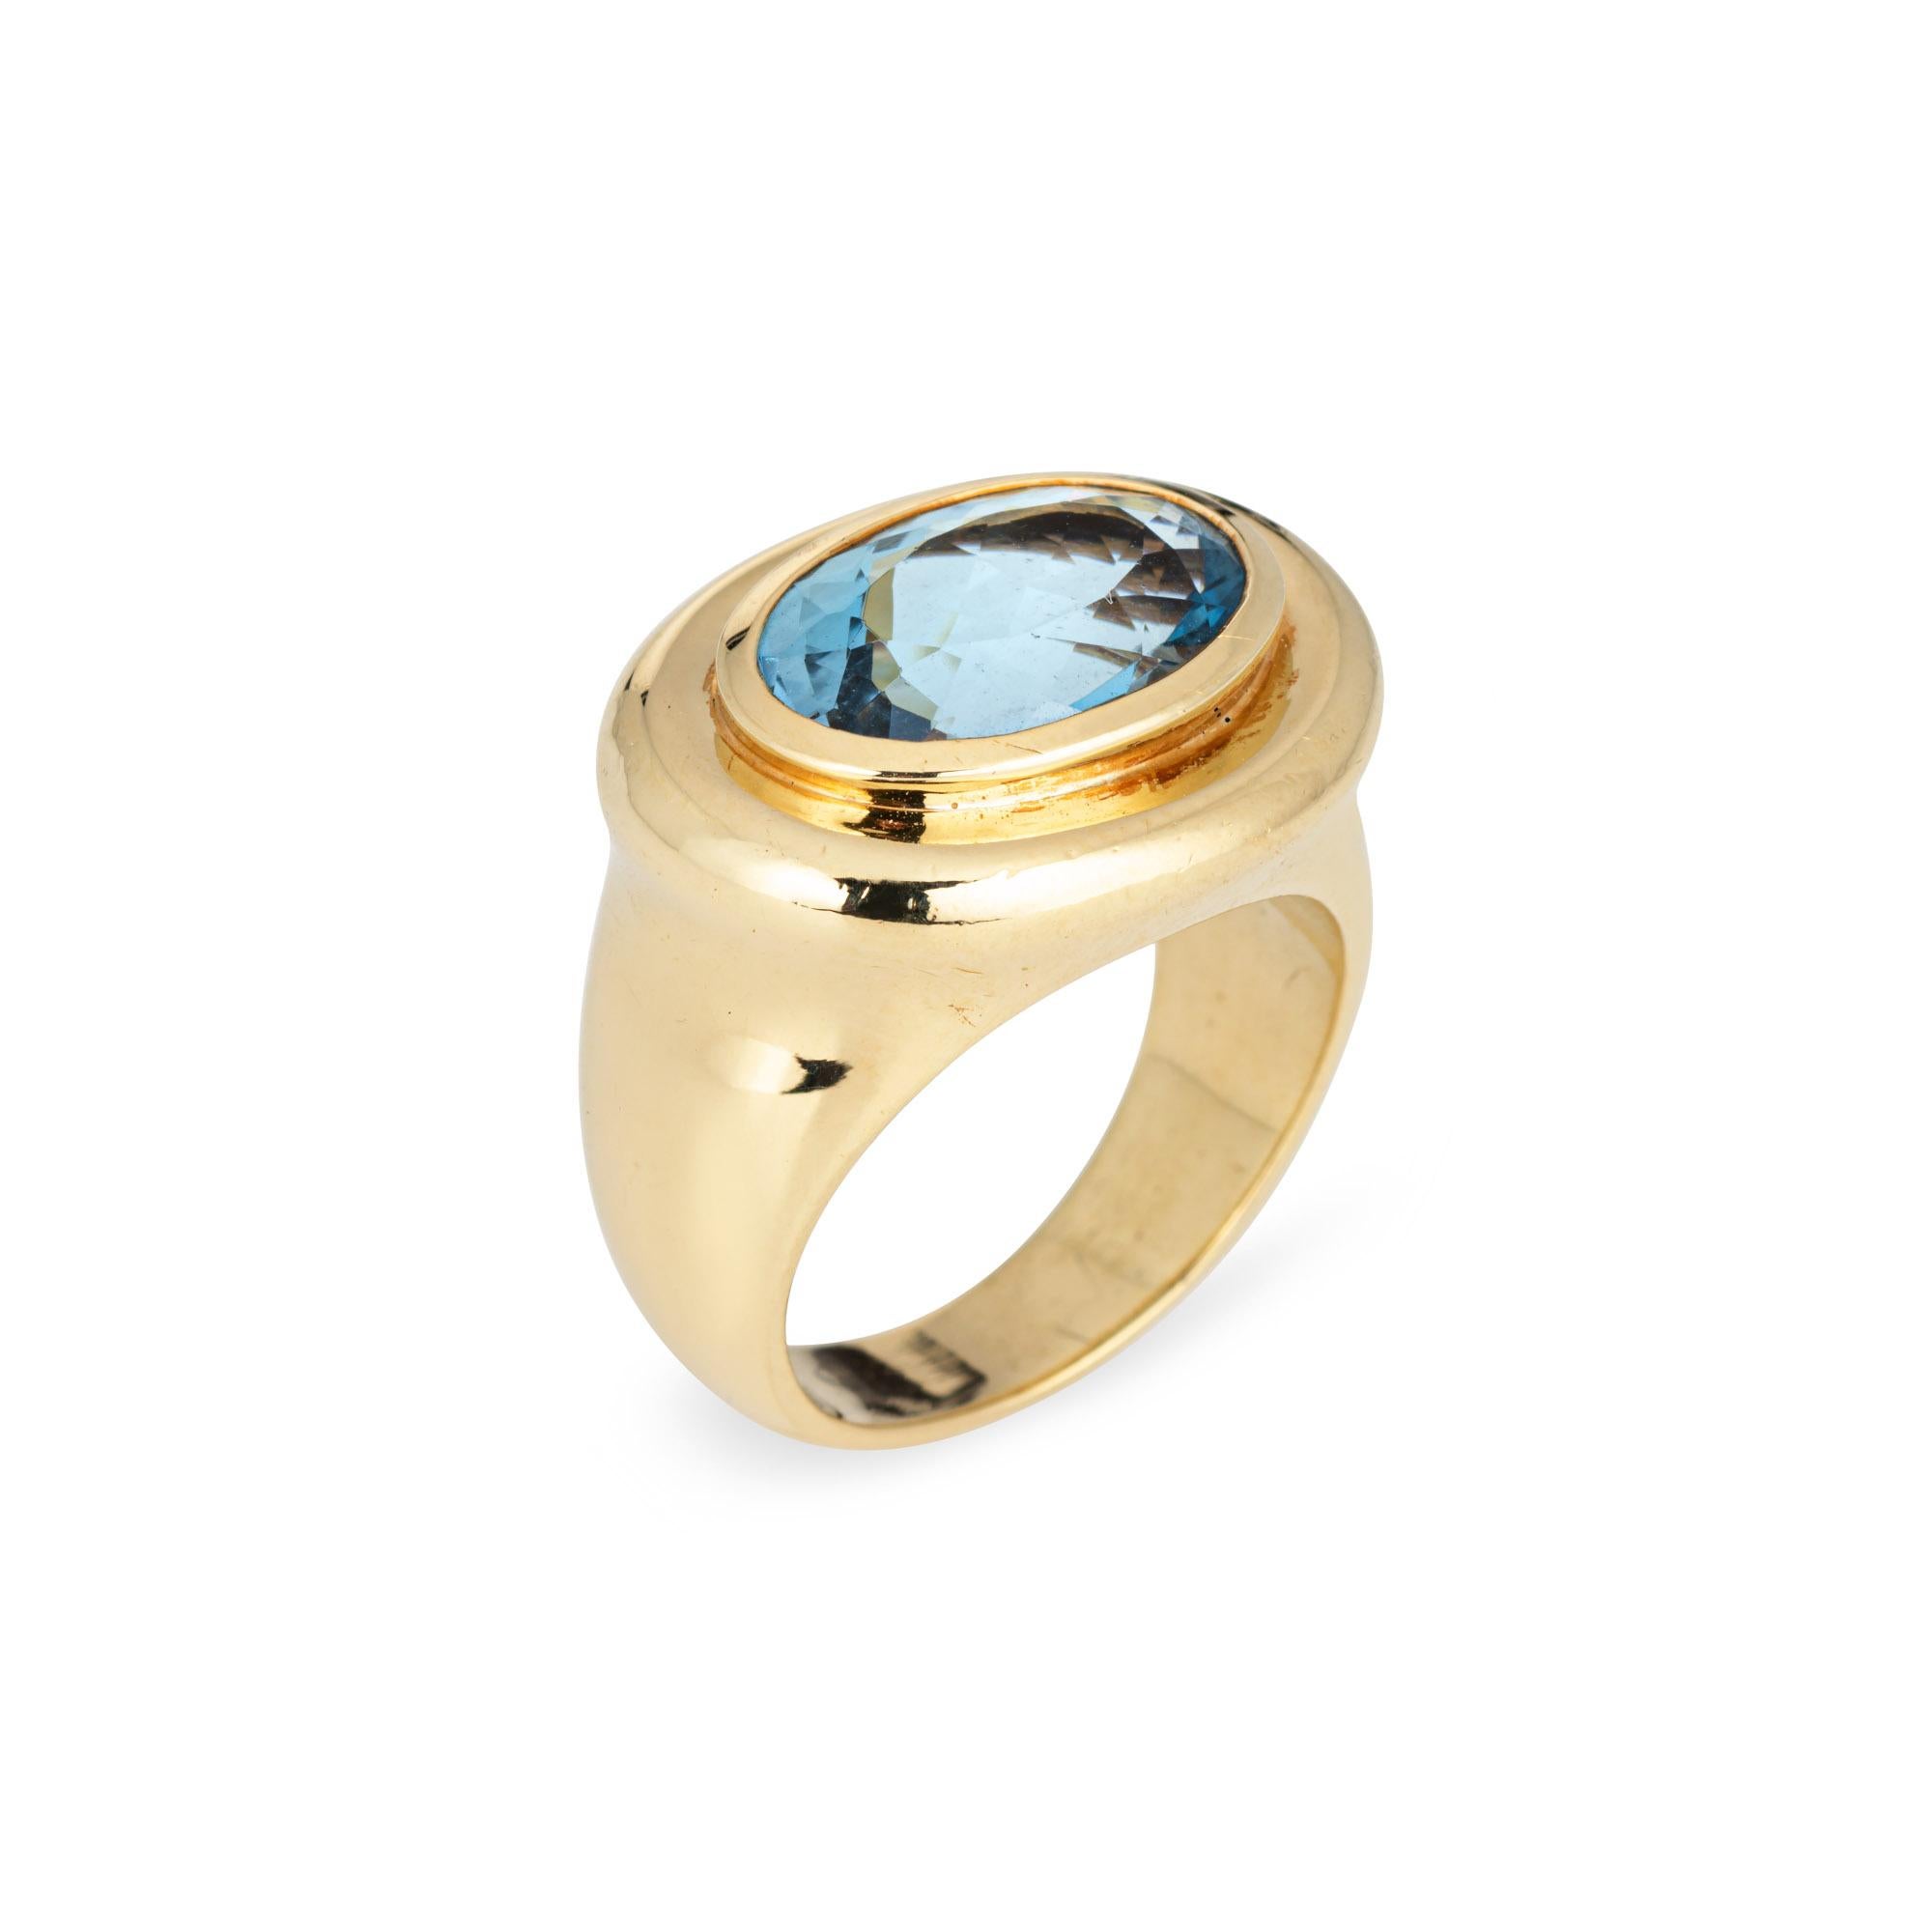 Rare vintage Tiffany & Co aquamarine ring designed by Paloma Picasso, crafted in 18 karat yellow gold (circa 1981).  

Oval faceted aquamarine measures 13mm x 8mm. The aquamarine is in very good condition and free of cracks or chips.

Dating to 1981